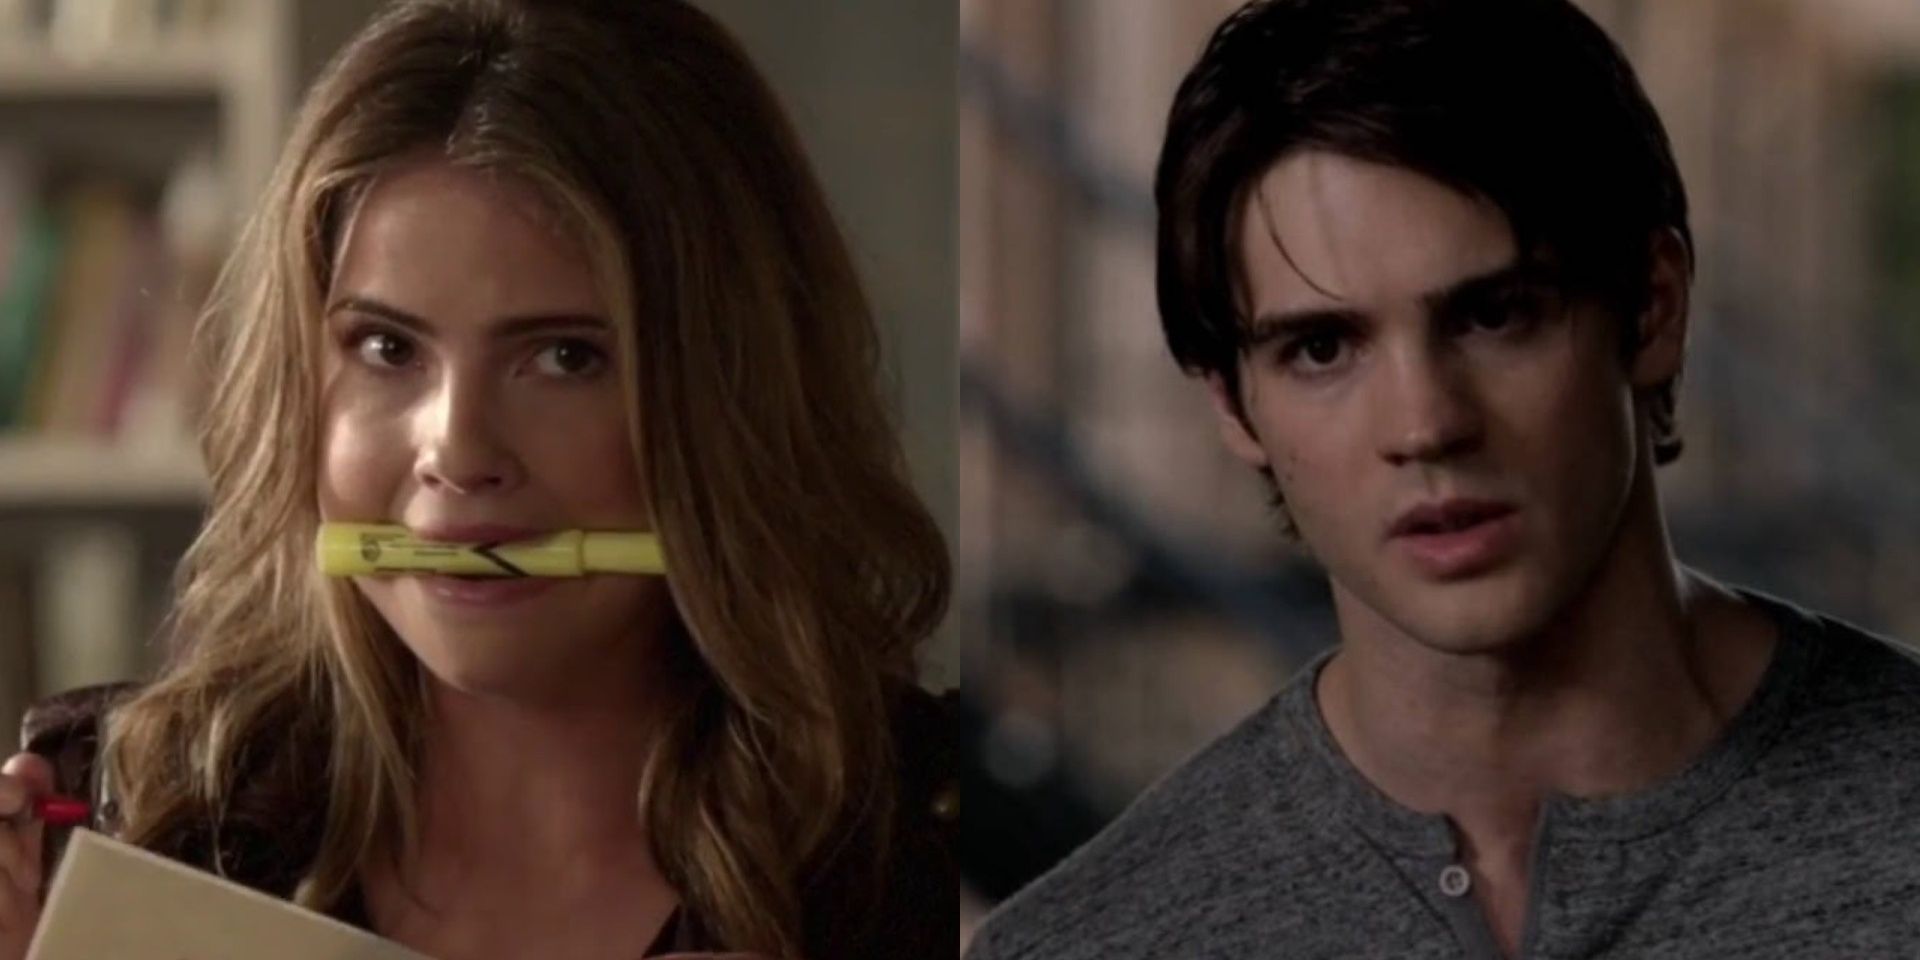 Malia and Jeremy split photo from teen wolf and vampire diaries